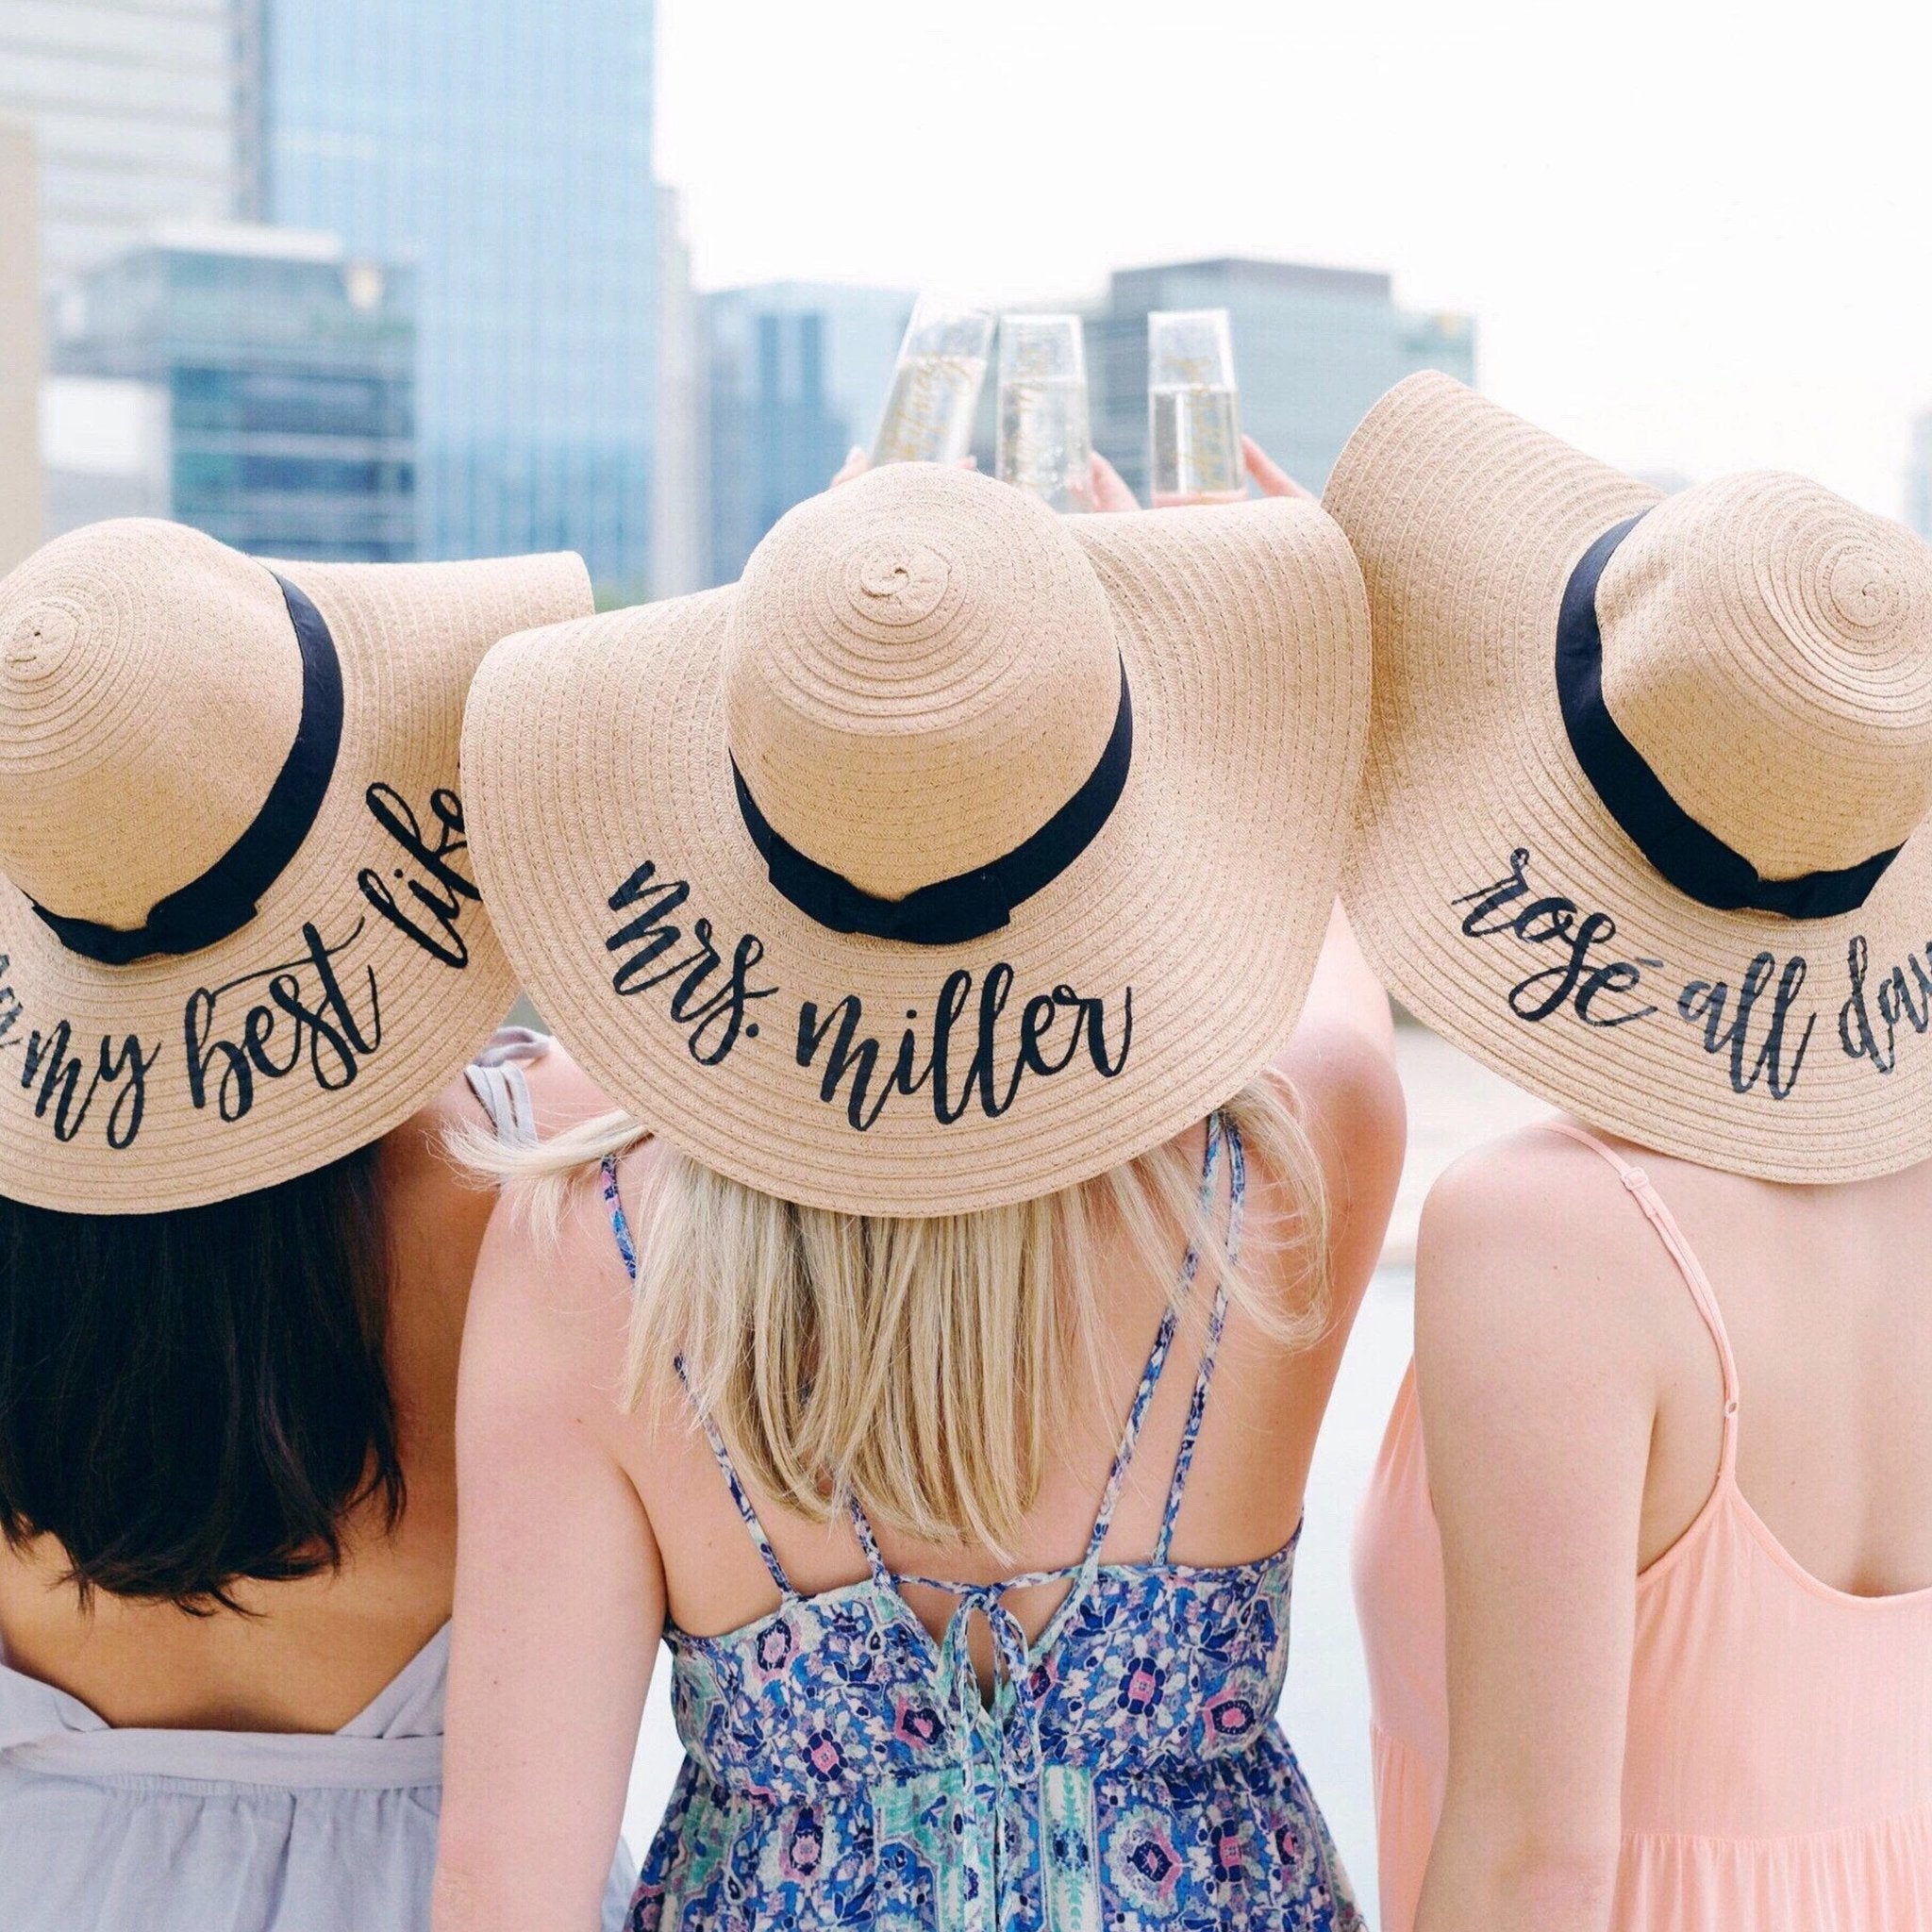 Floppy Beach Hats Sprinkled With Pink